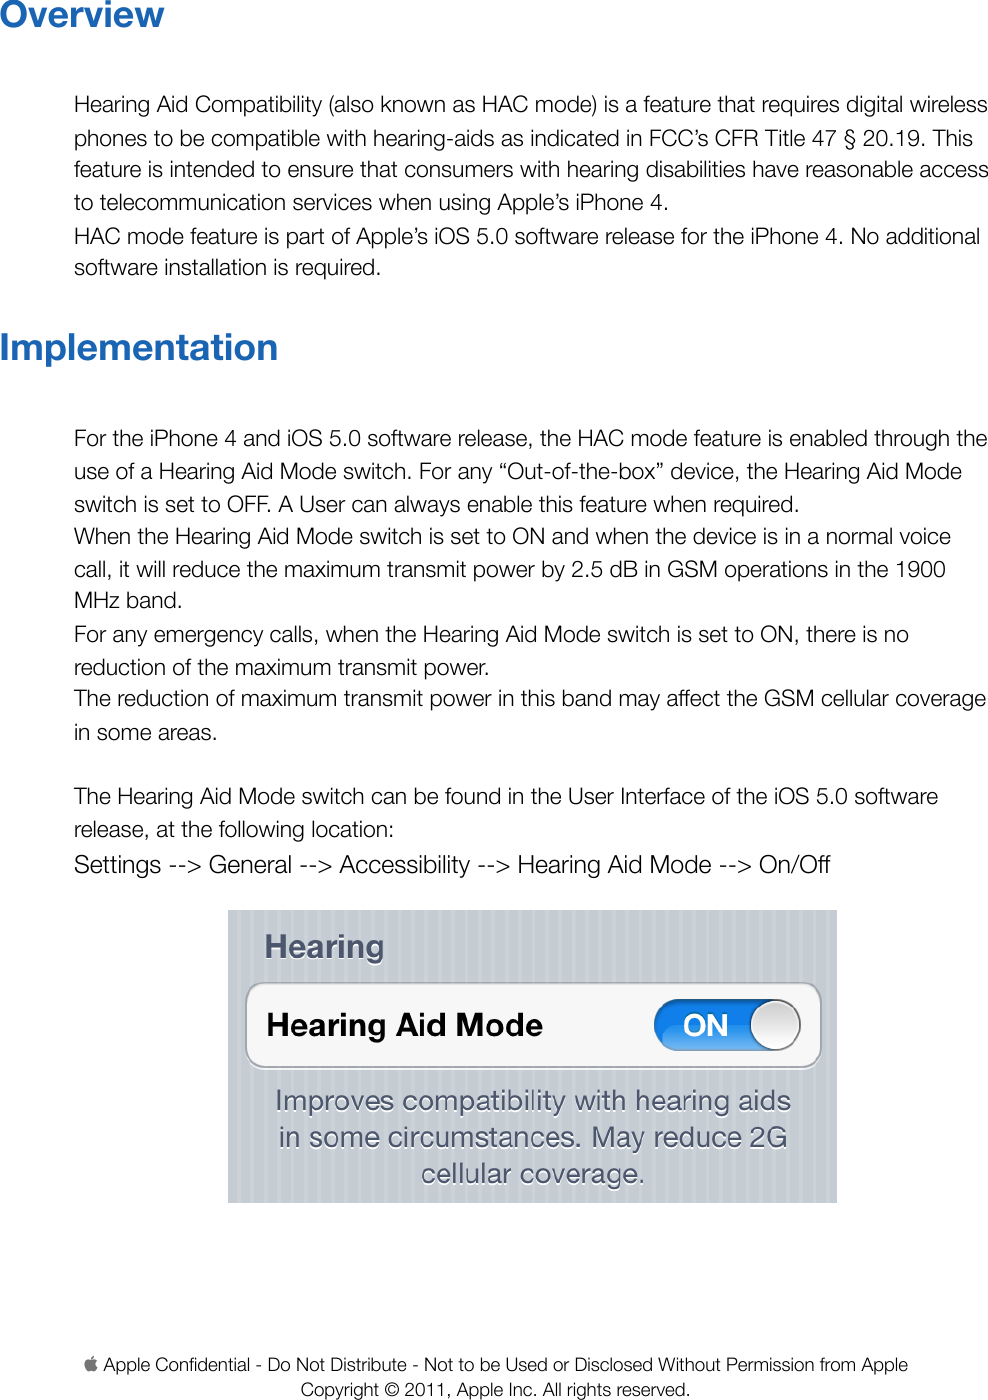 OverviewHearing Aid Compatibility (also known as HAC mode) is a feature that requires digital wireless phones to be compatible with hearing-aids as indicated in FCC’s CFR Title 47 § 20.19. This feature is intended to ensure that consumers with hearing disabilities have reasonable access to telecommunication services when using Apple’s iPhone 4. HAC mode feature is part of Apple’s iOS 5.0 software release for the iPhone 4. No additional software installation is required.ImplementationFor the iPhone 4 and iOS 5.0 software release, the HAC mode feature is enabled through the use of a Hearing Aid Mode switch. For any “Out-of-the-box” device, the Hearing Aid Mode switch is set to OFF. A User can always enable this feature when required. When the Hearing Aid Mode switch is set to ON and when the device is in a normal voice call, it will reduce the maximum transmit power by 2.5 dB in GSM operations in the 1900 MHz band. For any emergency calls, when the Hearing Aid Mode switch is set to ON, there is no reduction of the maximum transmit power.The reduction of maximum transmit power in this band may affect the GSM cellular coverage in some areas.The Hearing Aid Mode switch can be found in the User Interface of the iOS 5.0 software release, at the following location:Settings --&gt; General --&gt; Accessibility --&gt; Hearing Aid Mode --&gt; On/Off Apple Conﬁdential - Do Not Distribute - Not to be Used or Disclosed Without Permission from Apple Copyright © 2011, Apple Inc. All rights reserved. 